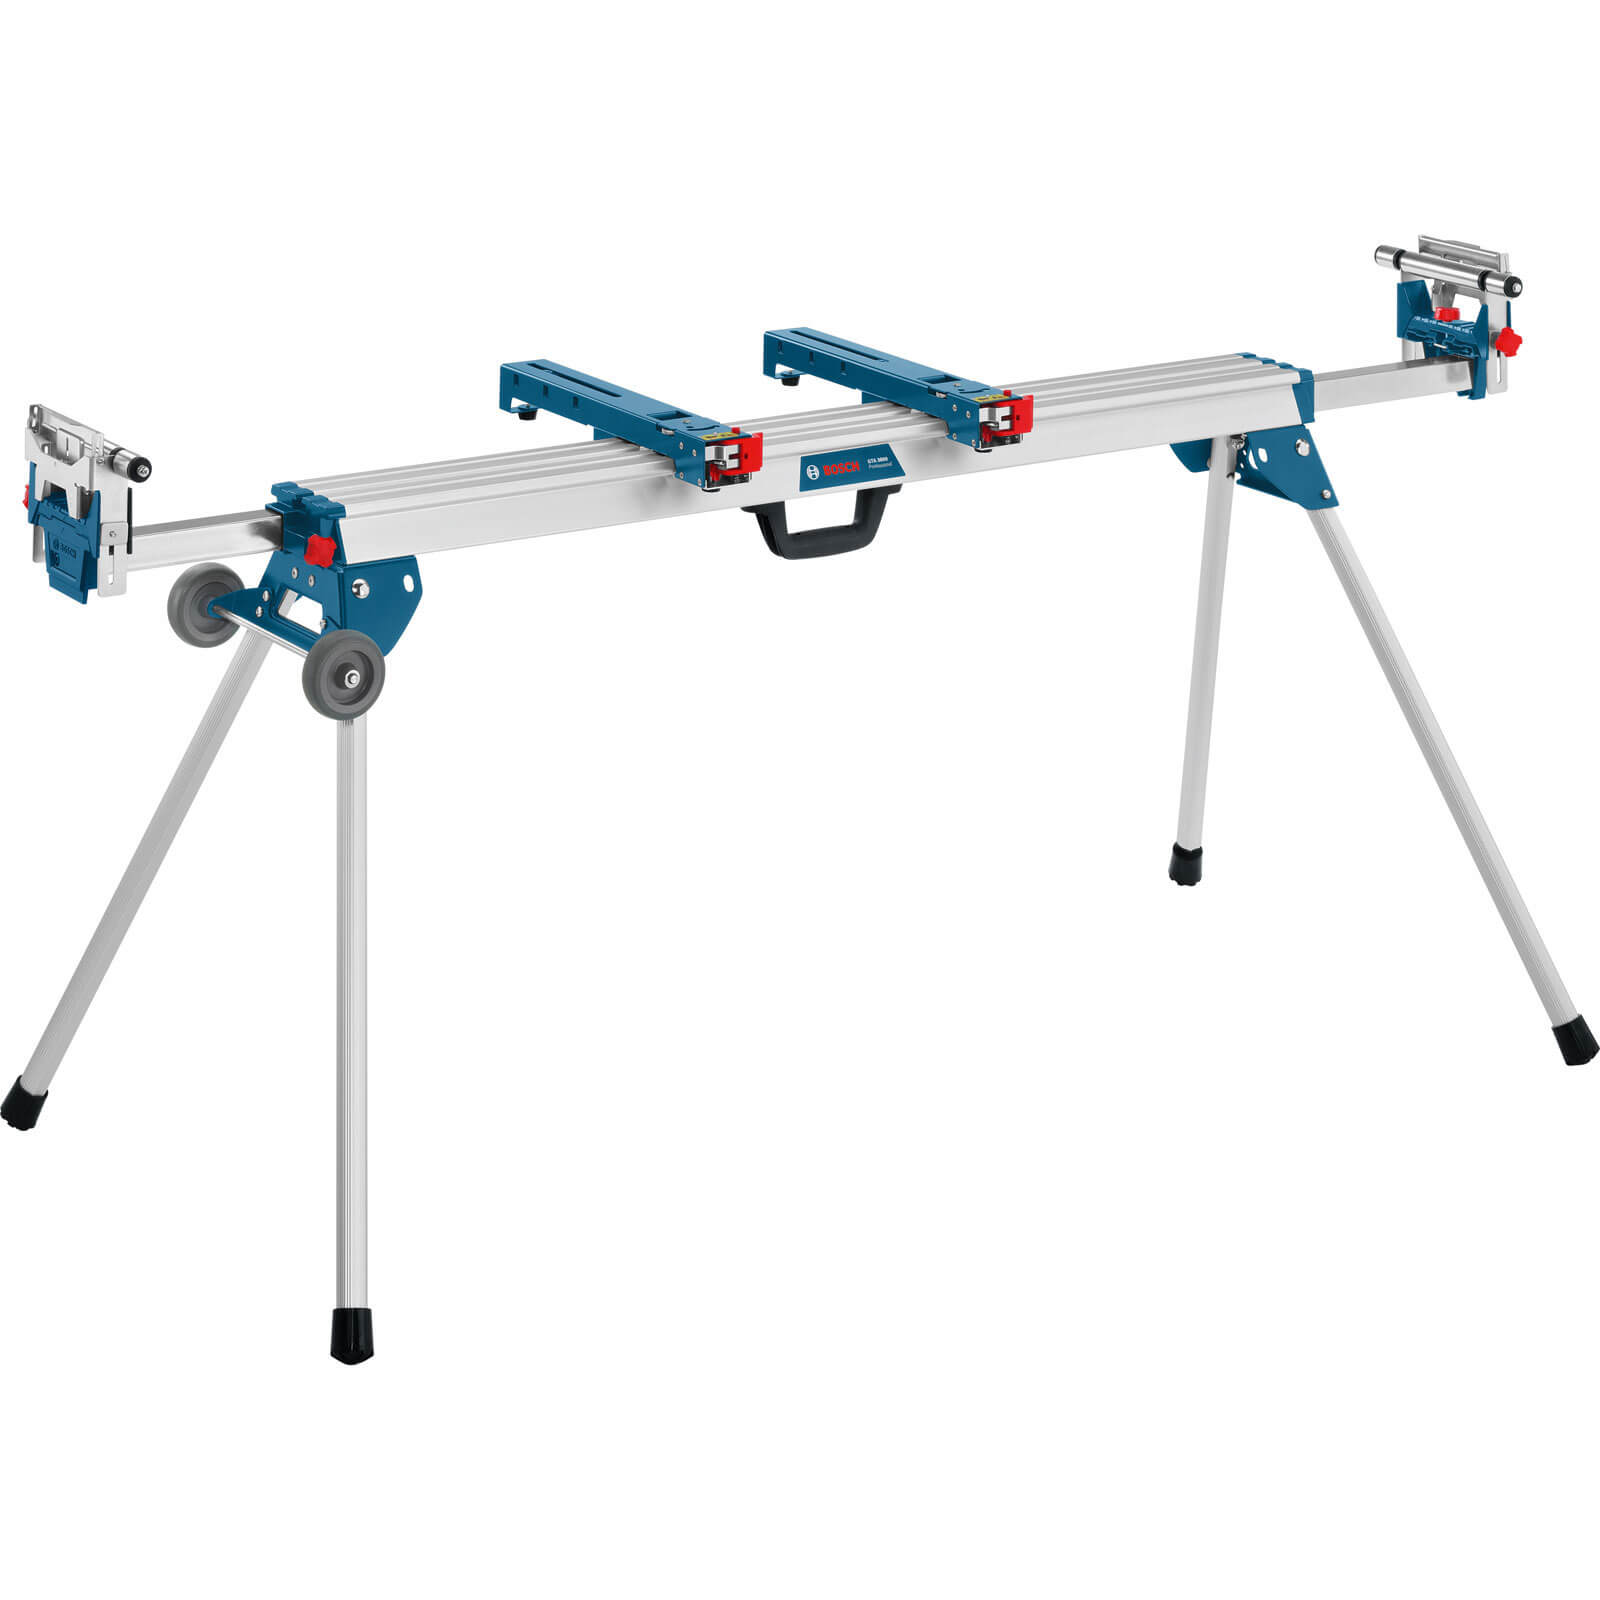 Bosch GTA 3800 Stand for Mitre Saws